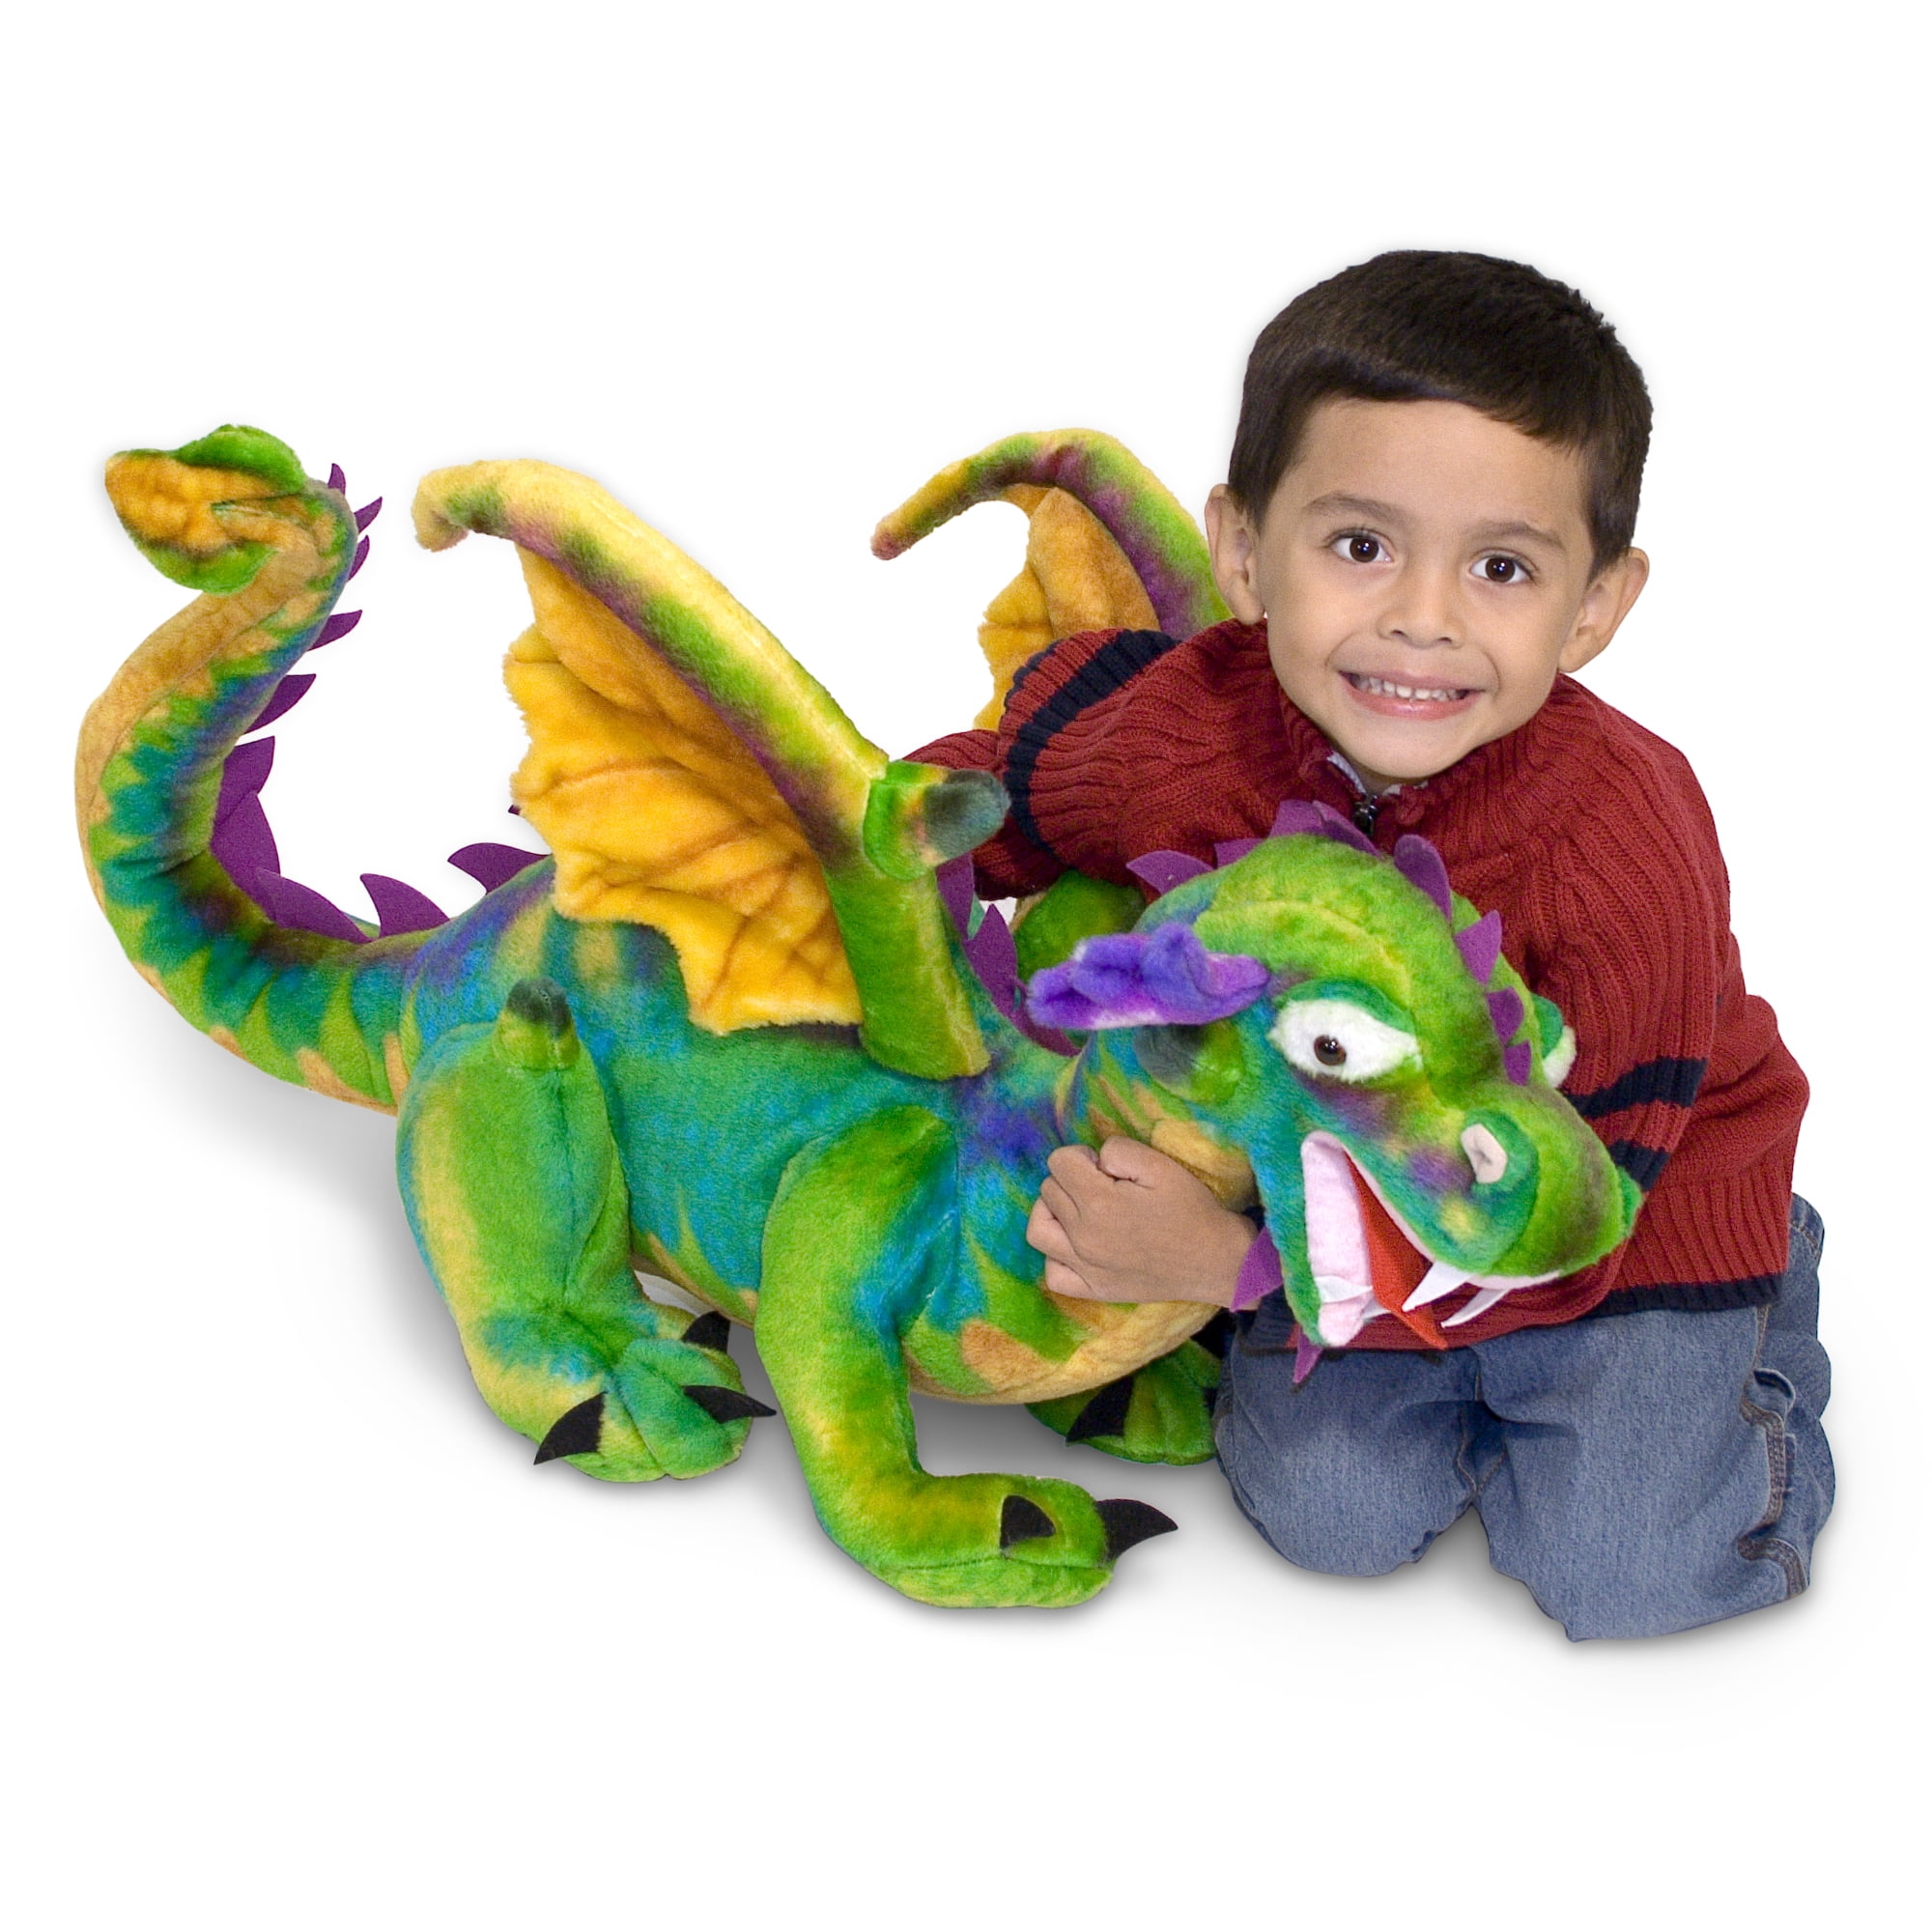 Melissa & Doug Smoulder the Dragon Puppet with Detachable Wooden Rod #3908 